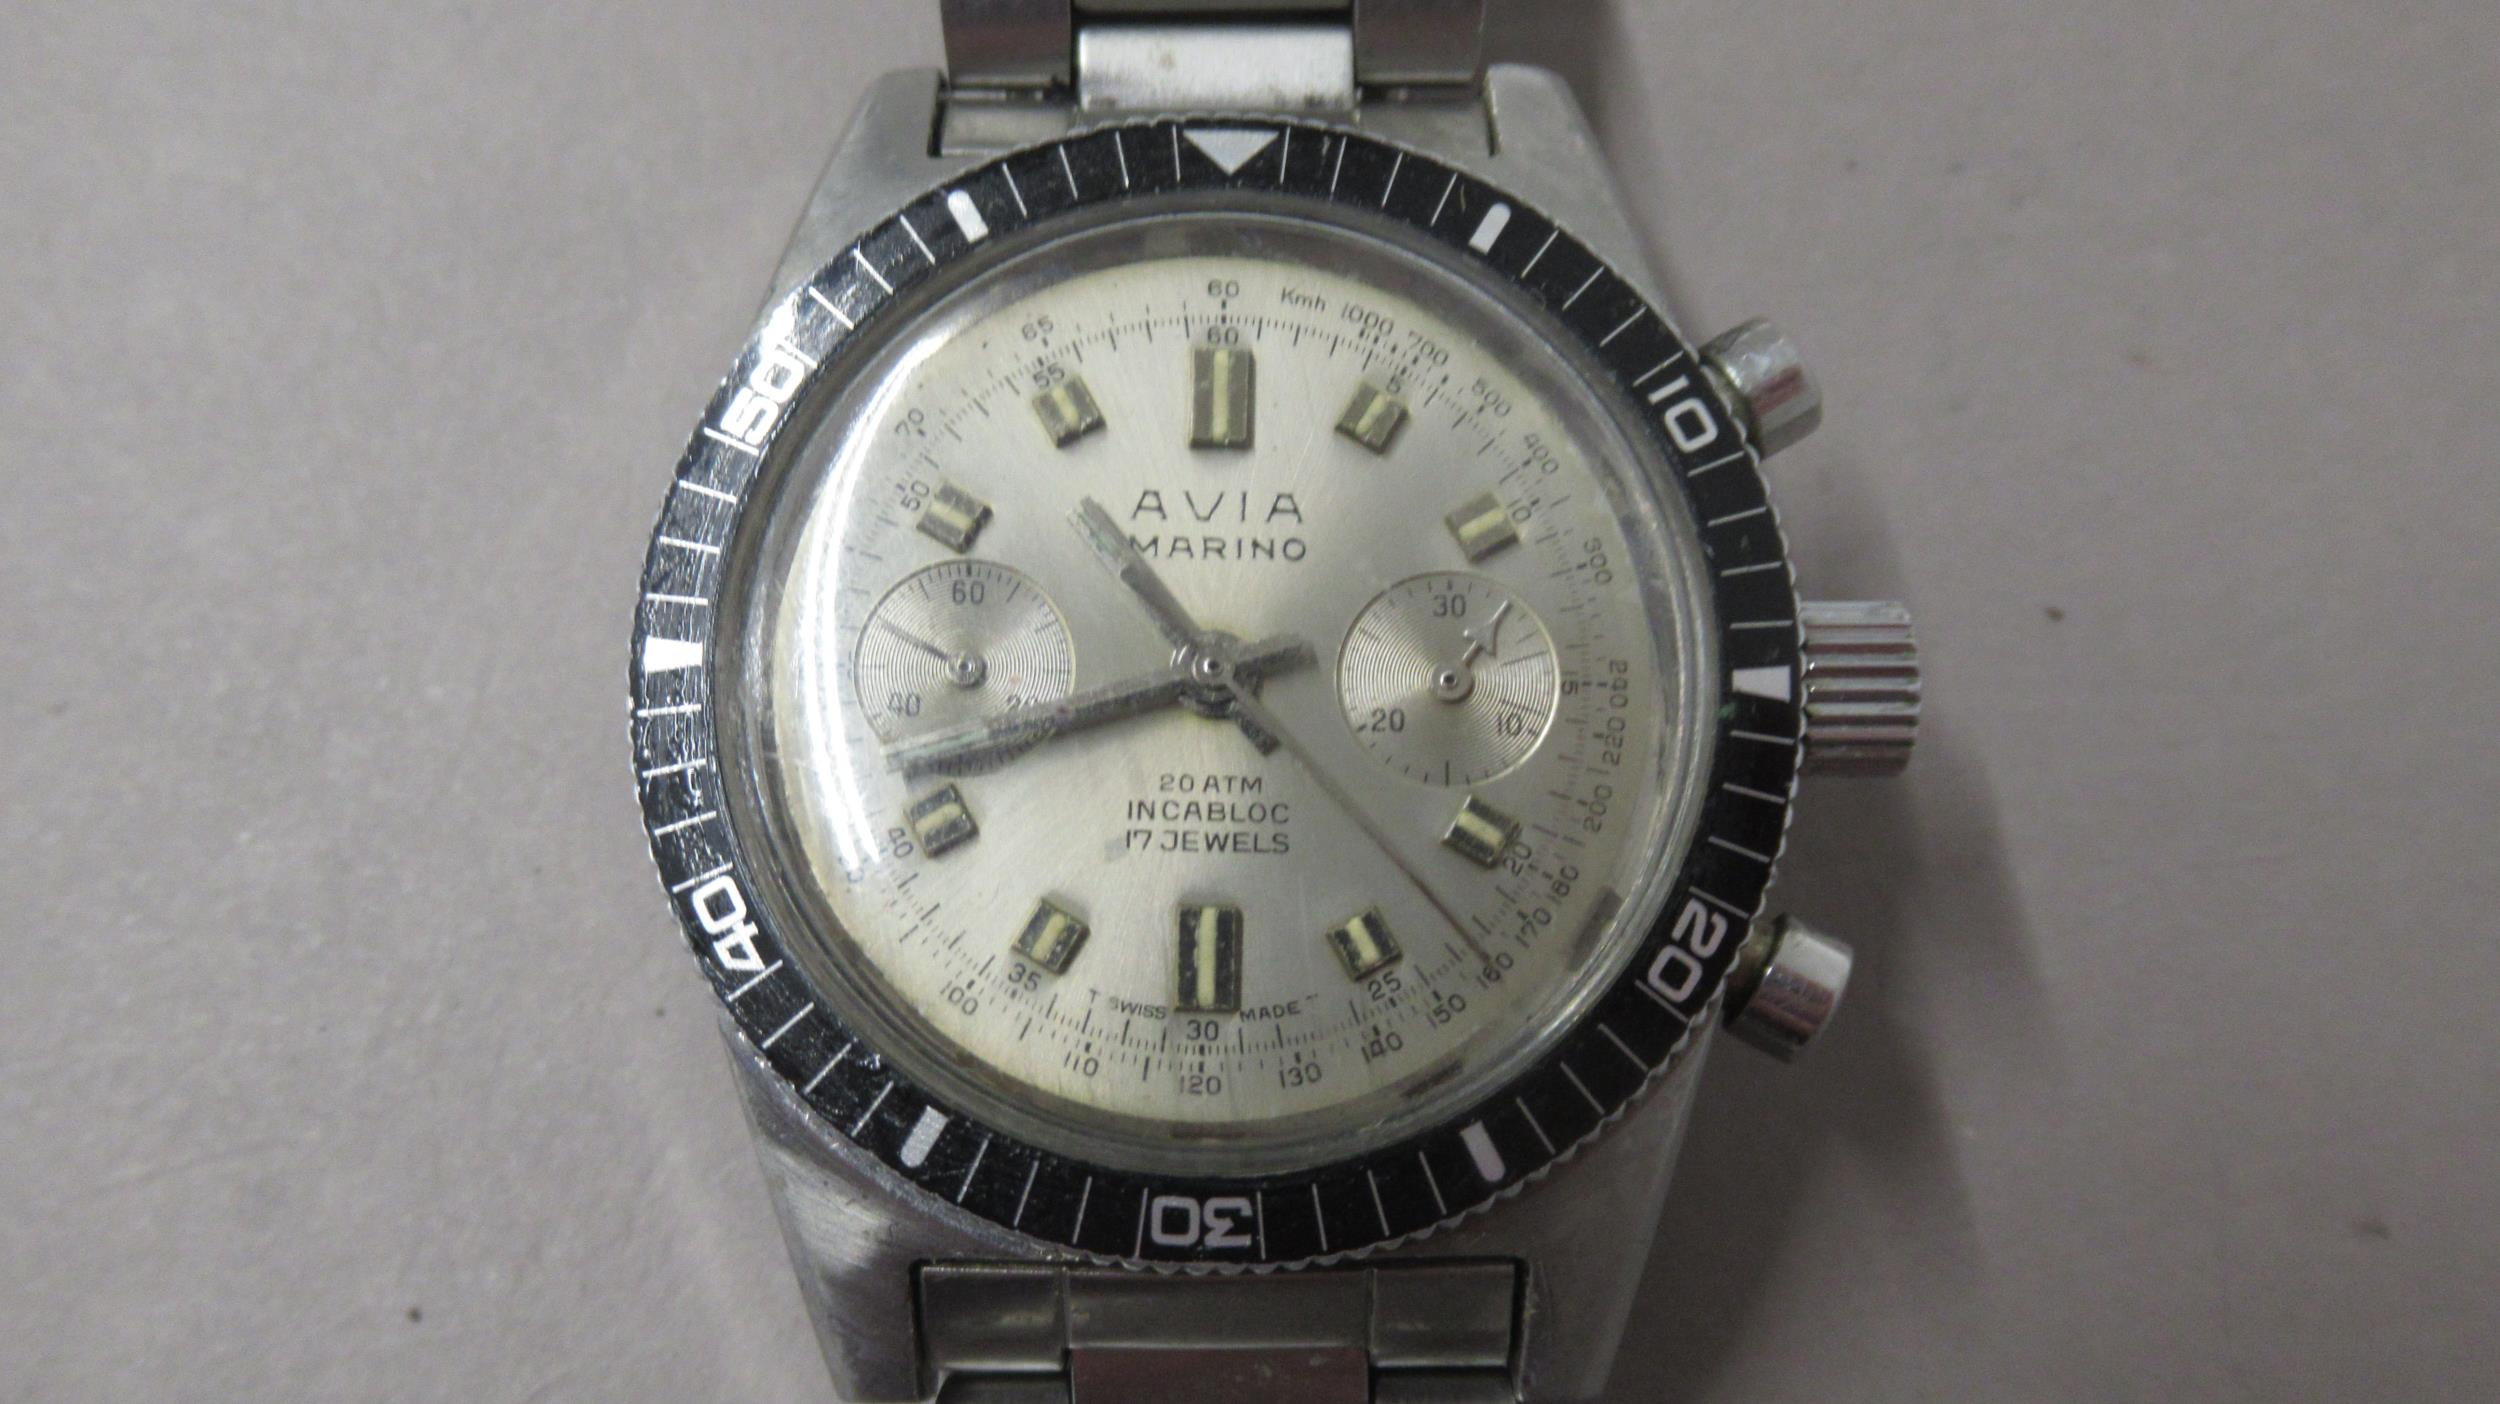 AVIA. Marino 1960's divers chronograph. 36mm. Crisp operation and keeping excellent time.